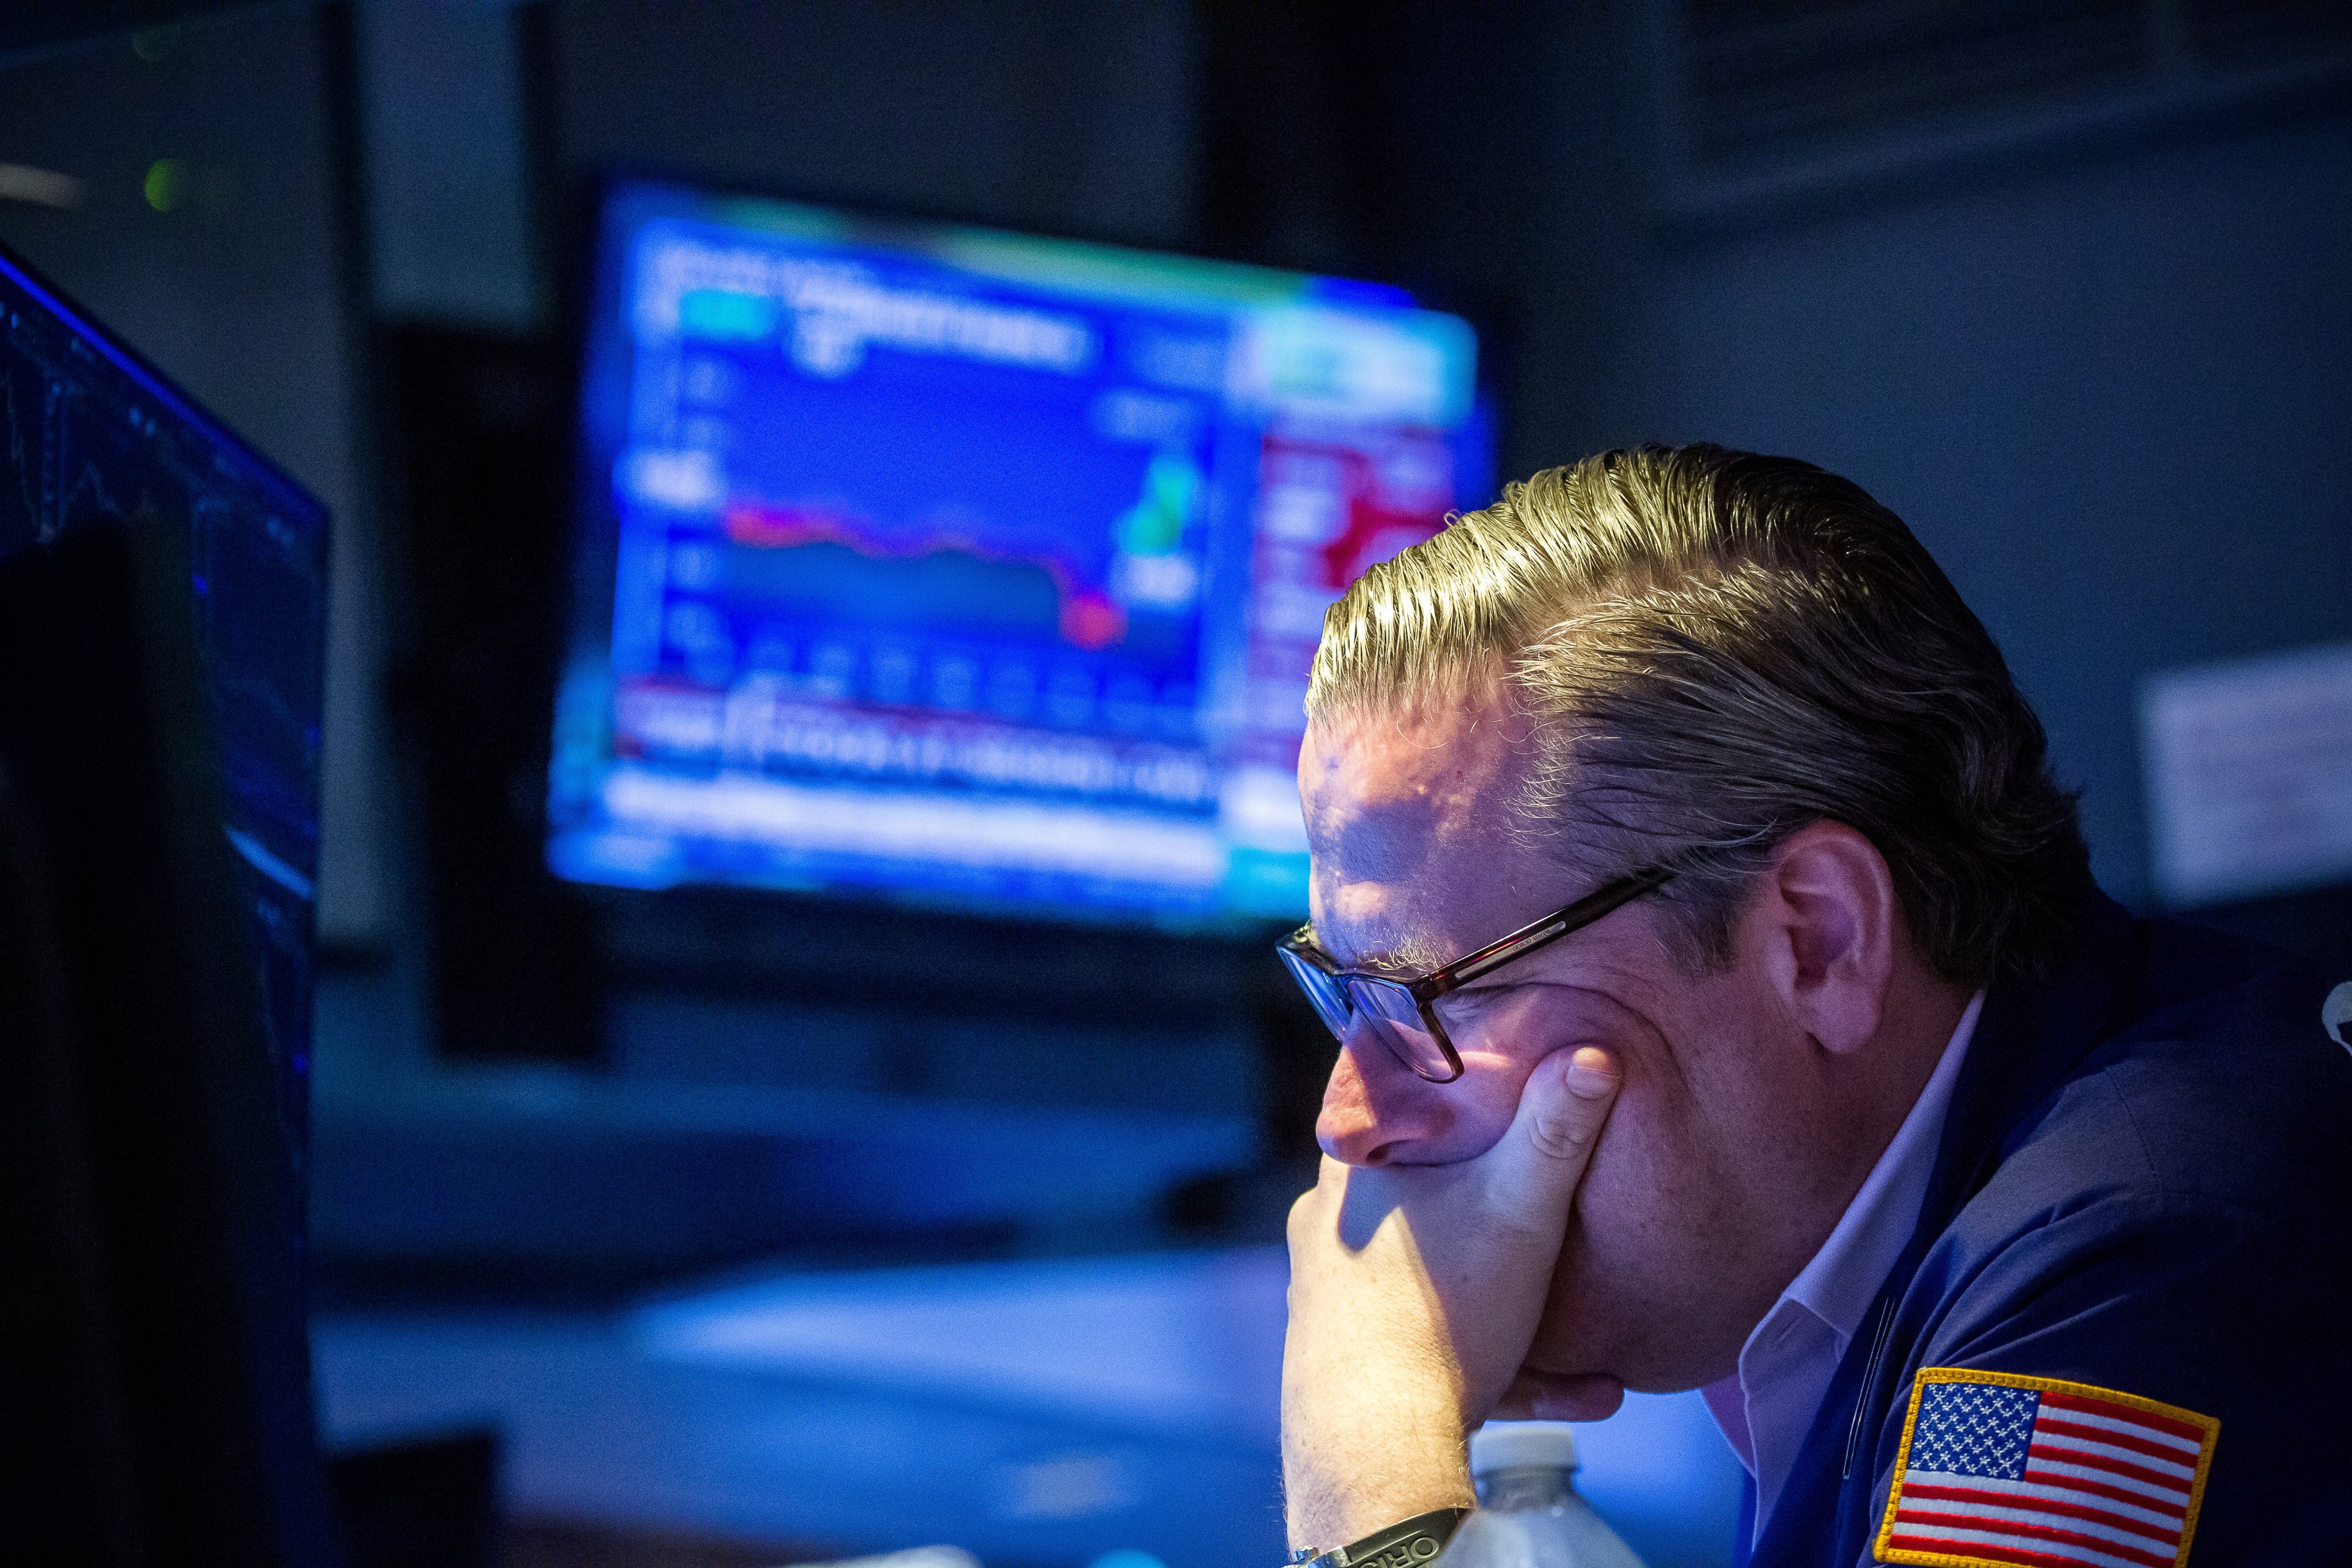 A trader works on the floor of the New York Stock Exchange on November 2. Stocks fell after Federal Reserve chair Jay Powell said it was “very premature” to consider pausing interest rate rises. Photo: Xinhua